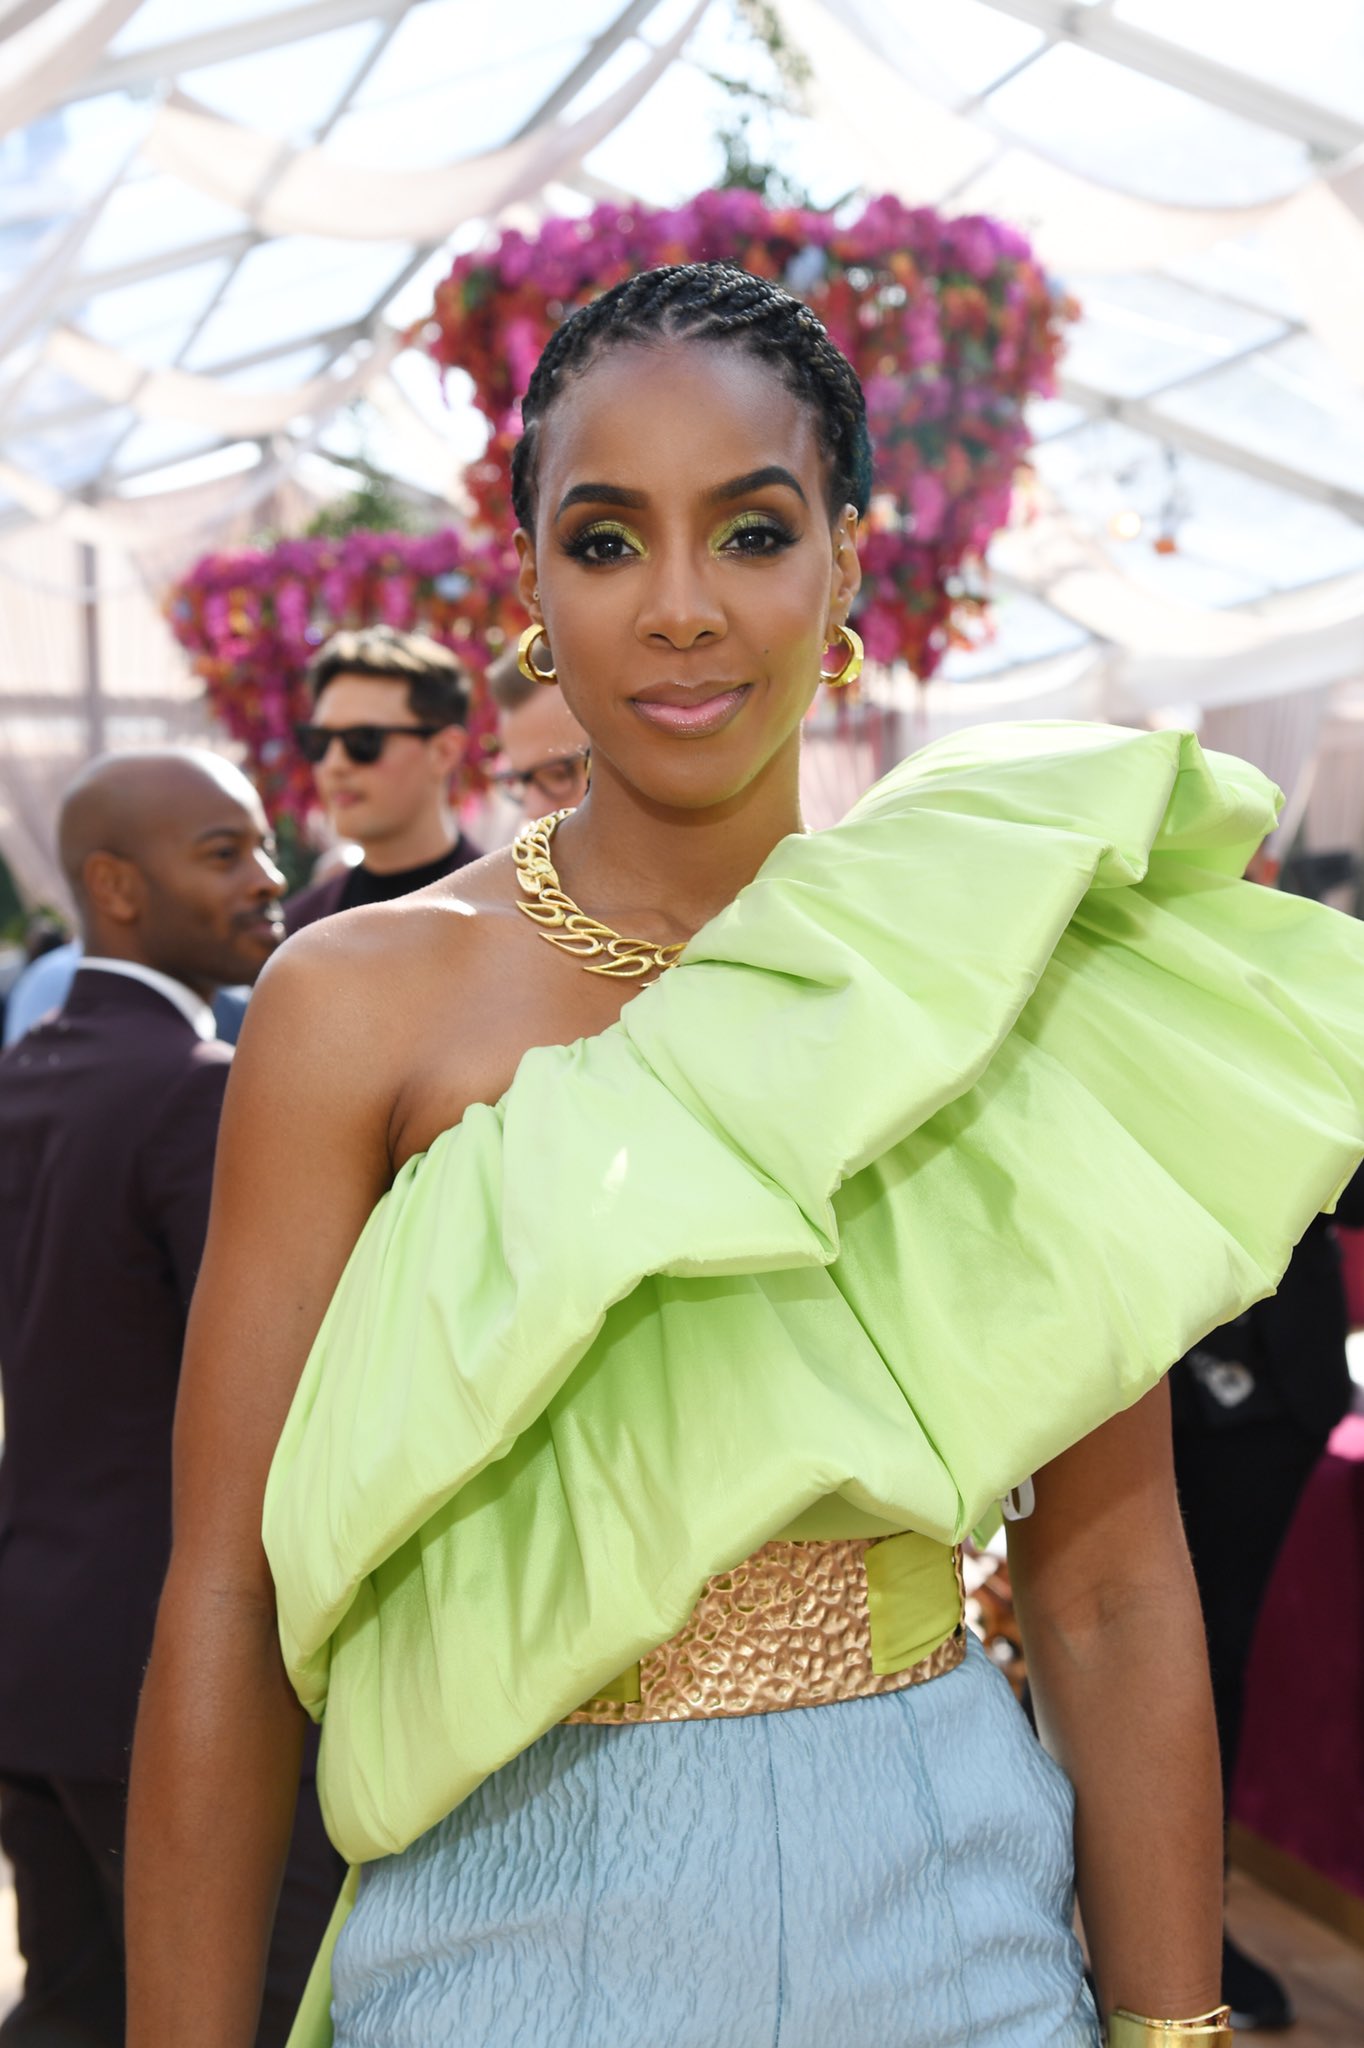 Happy 39th birthday to the effortless beauty Kelly Rowland! 